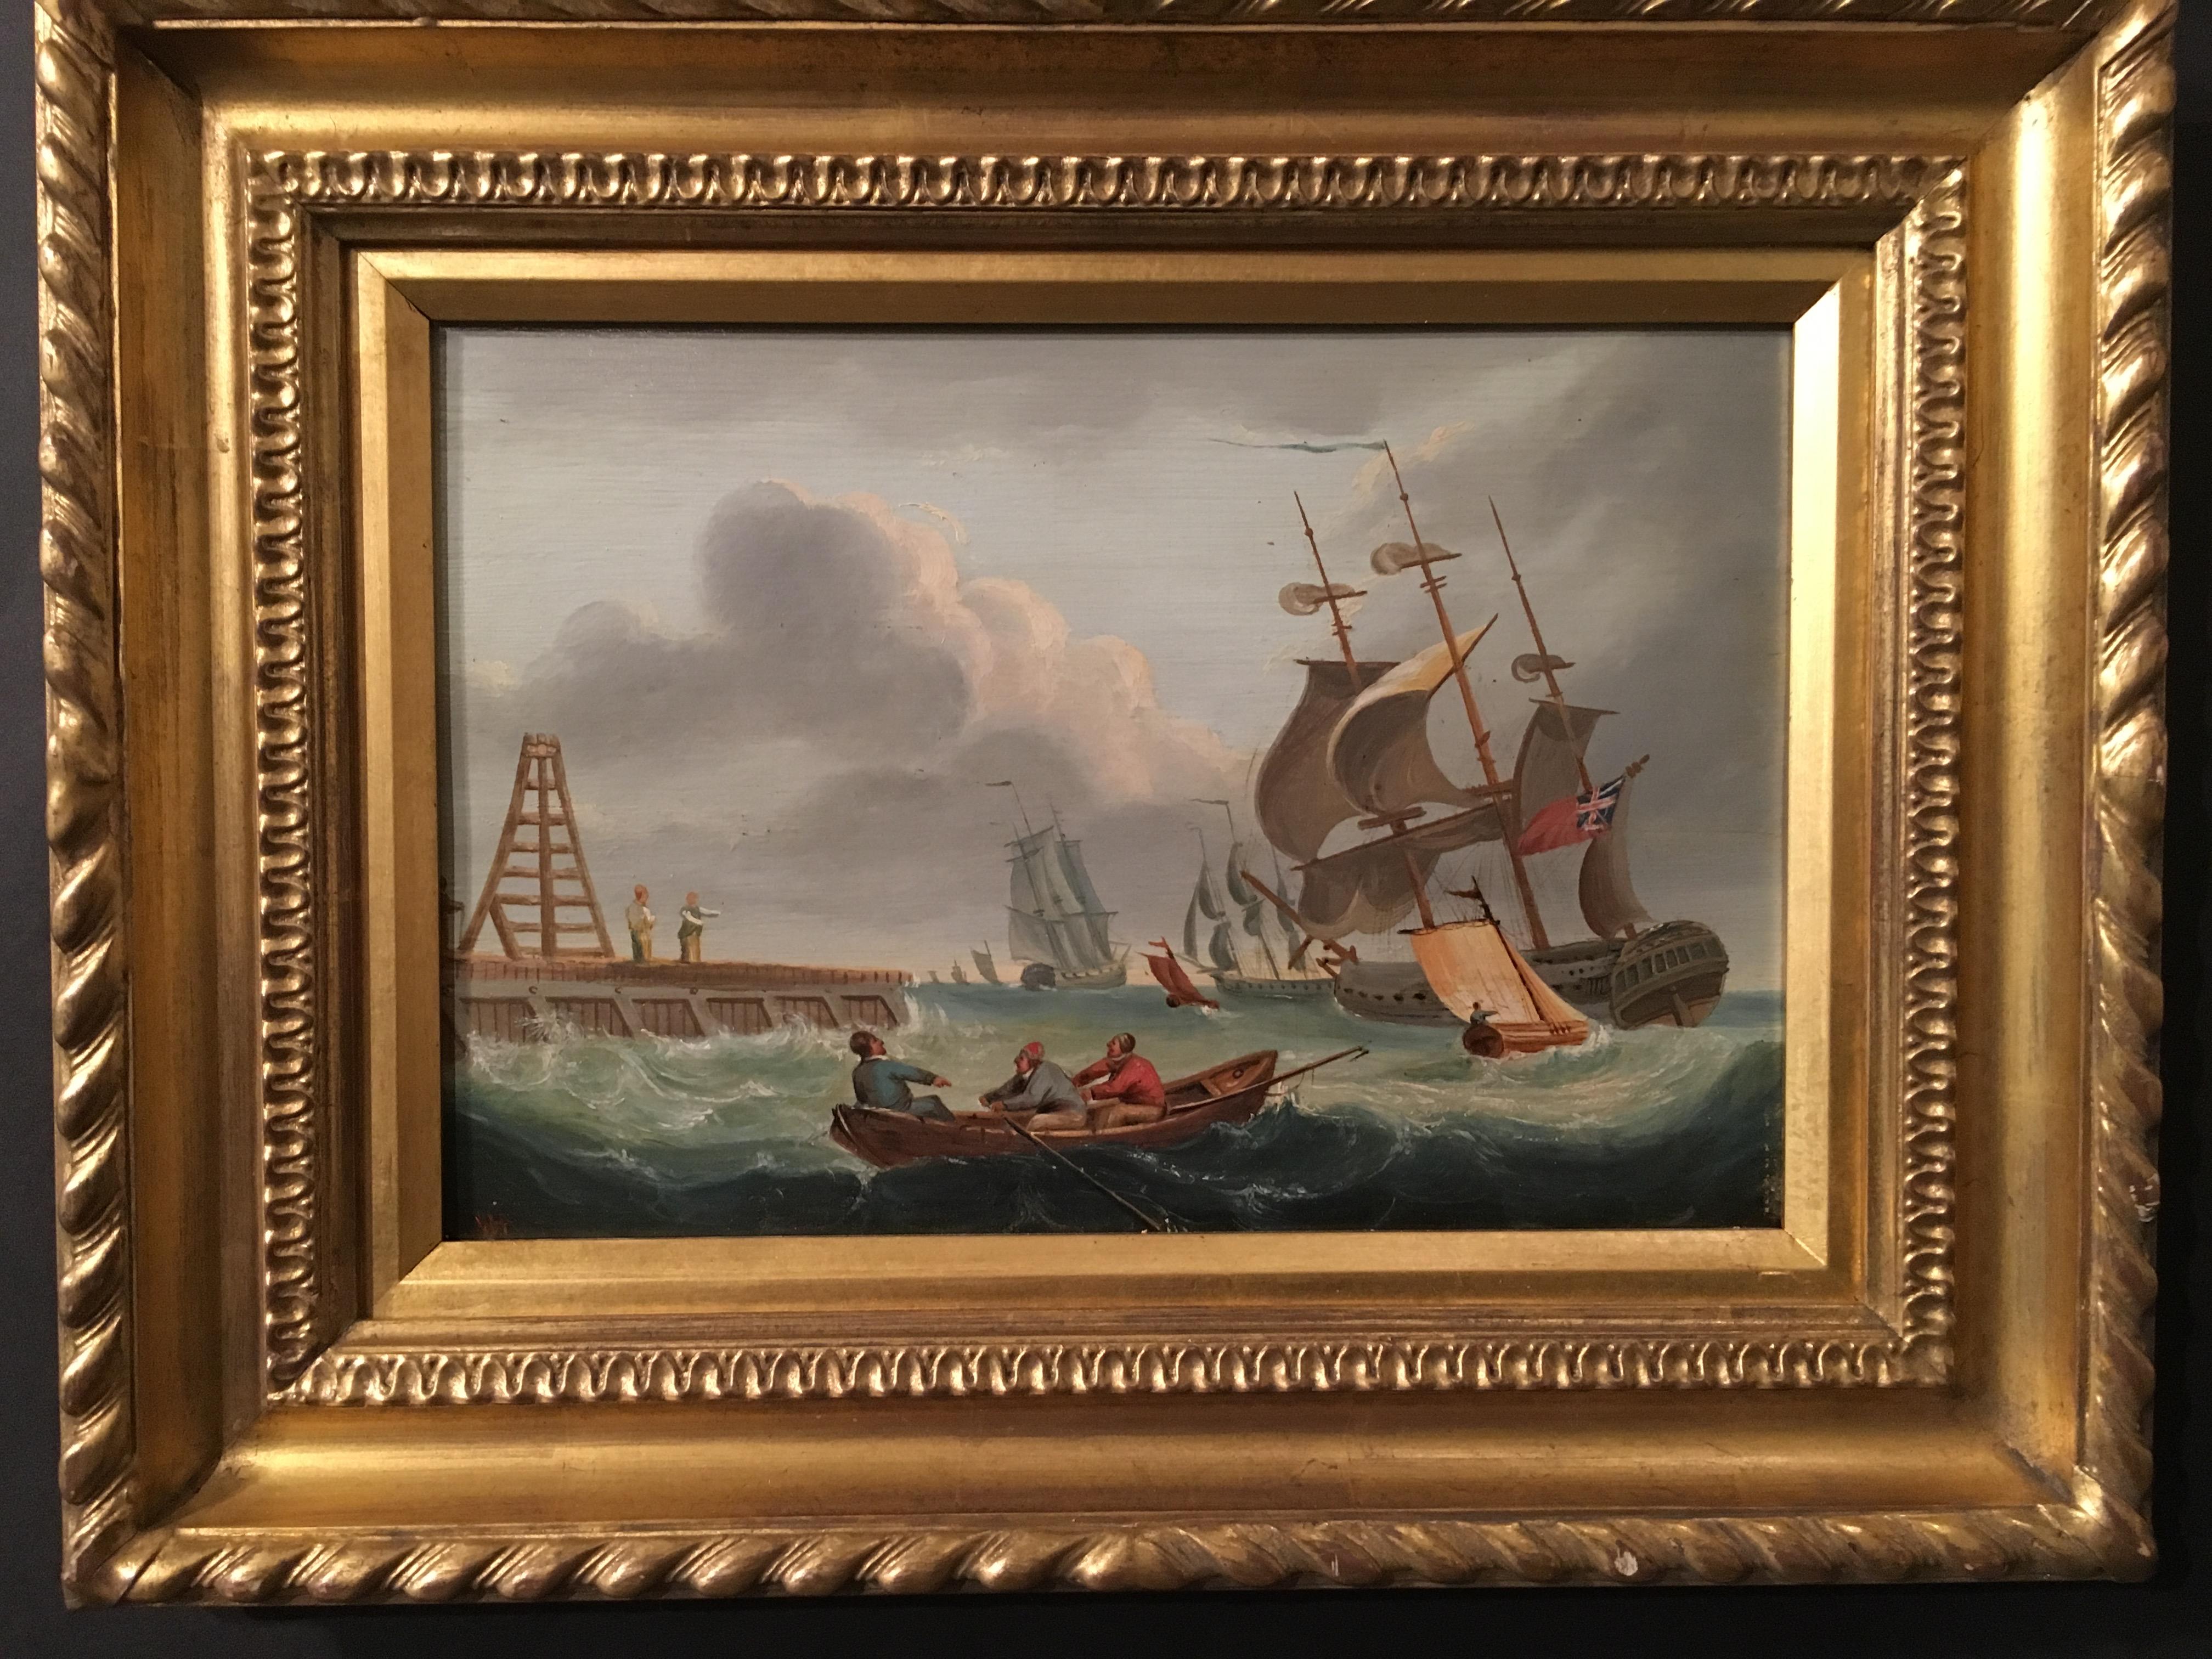 English shipping scene with sale boats, war ships and a quayside harbor.